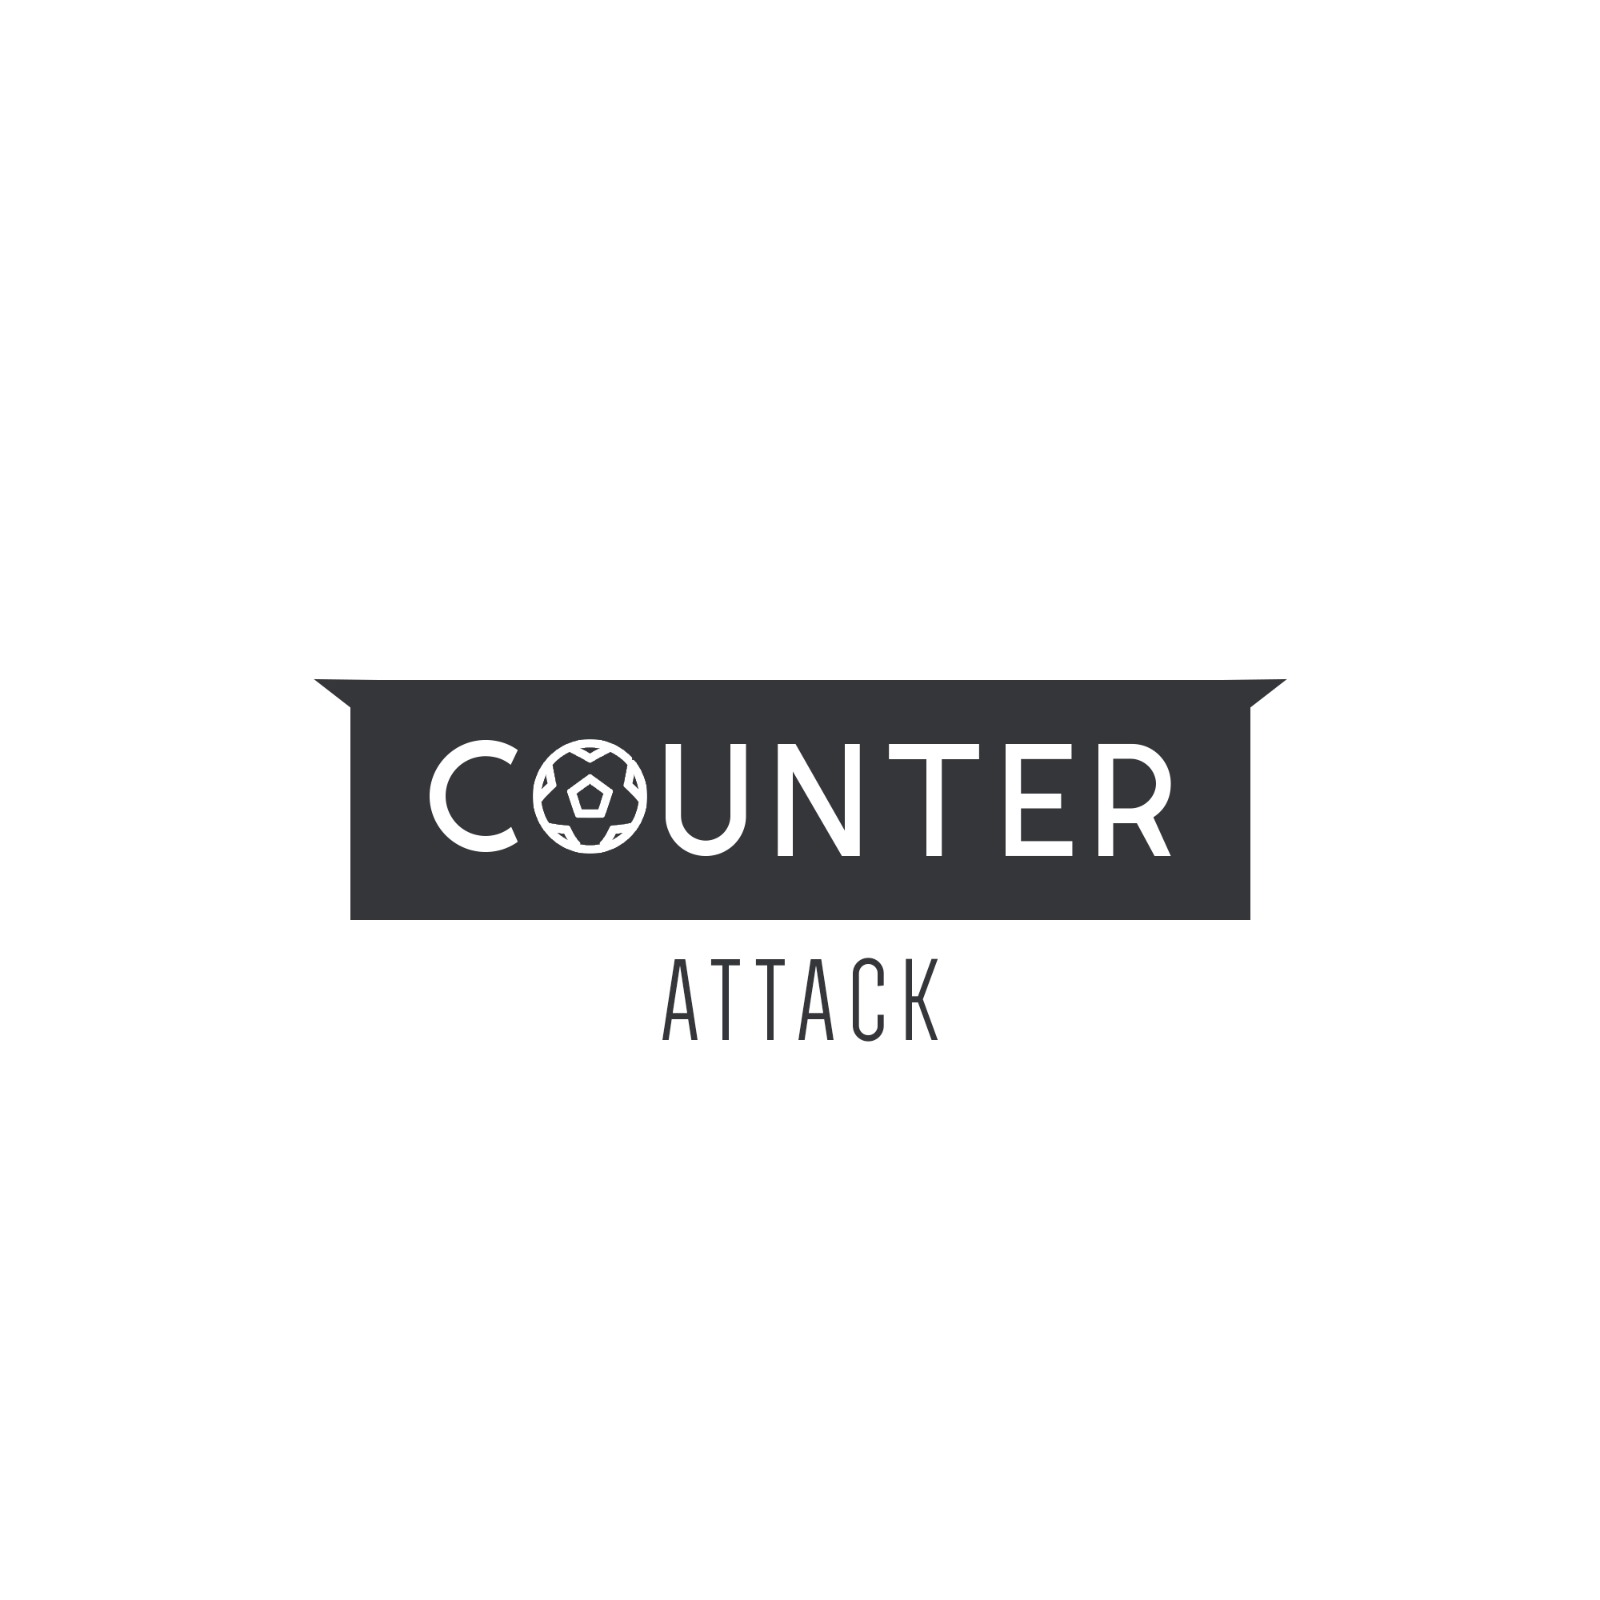 Counter Attack - Episode 89 - Southgate Throws Sterling Under Bus